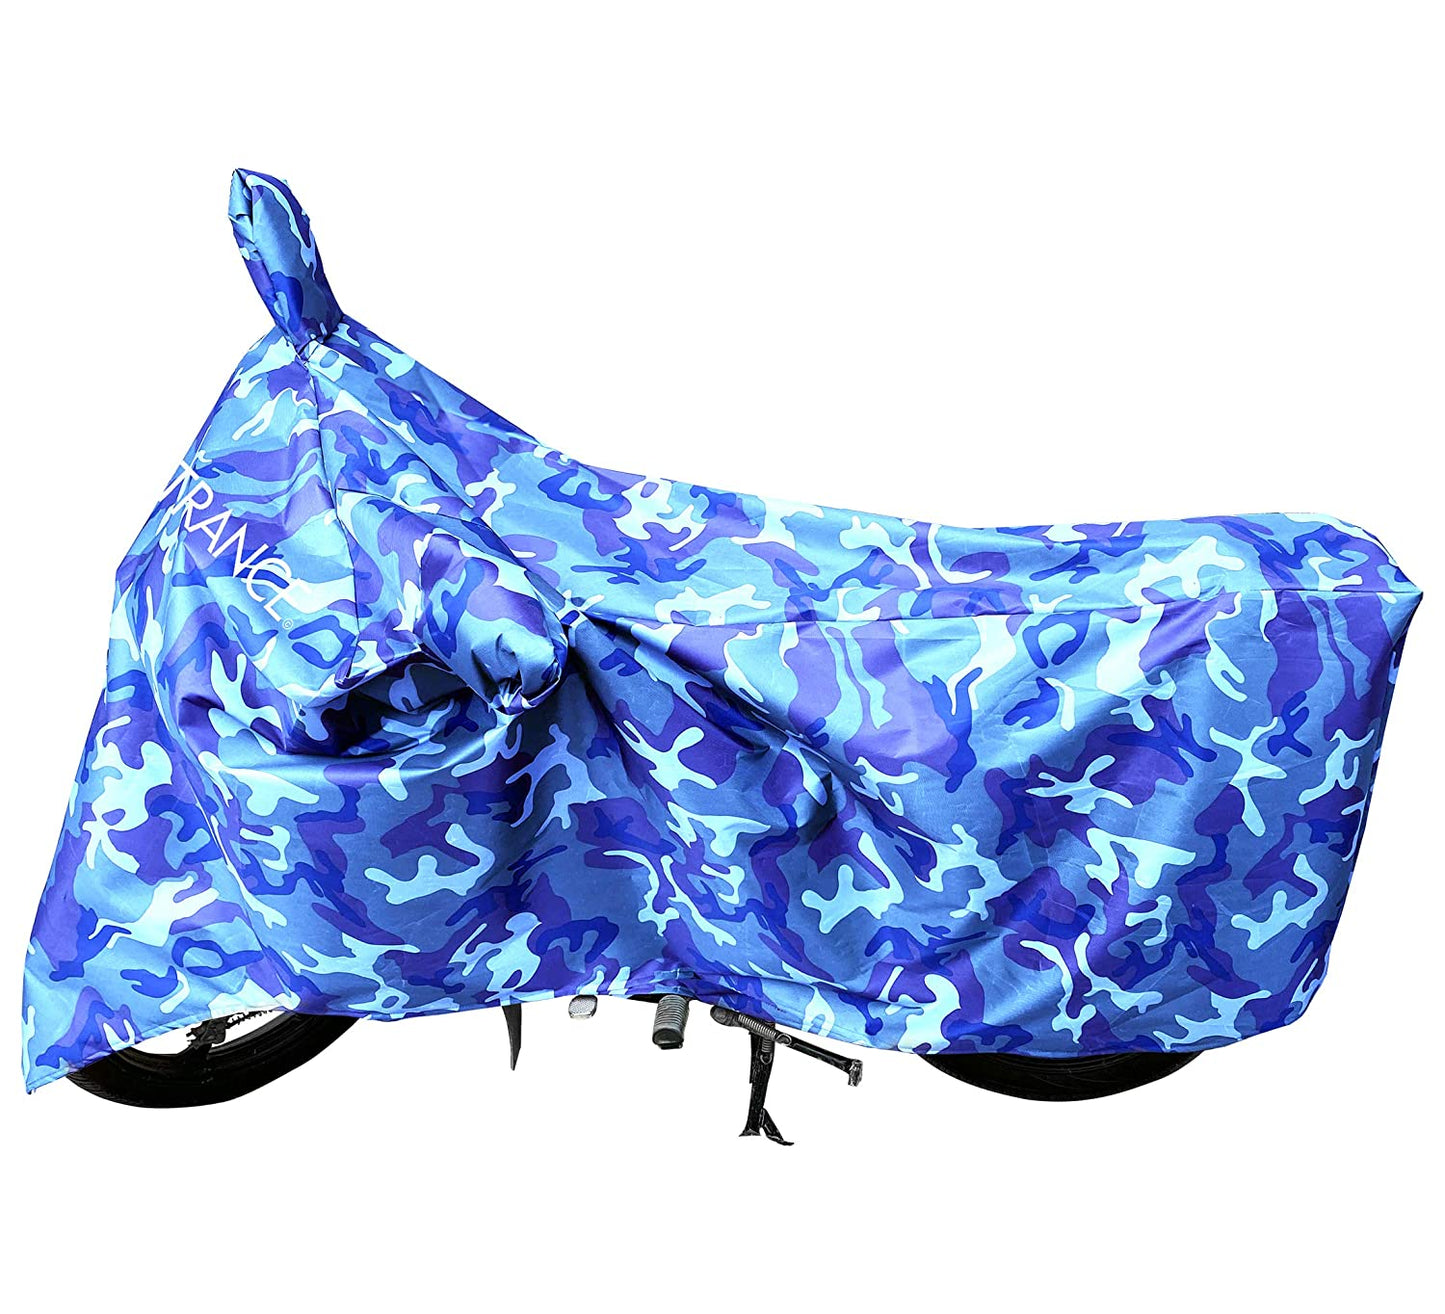 MotoTrance Jungle Bike Body Covers For Piaggio Vespa VXL 150 - Interlock-Stitched Waterproof and Heat Resistant with Mirror Pockets